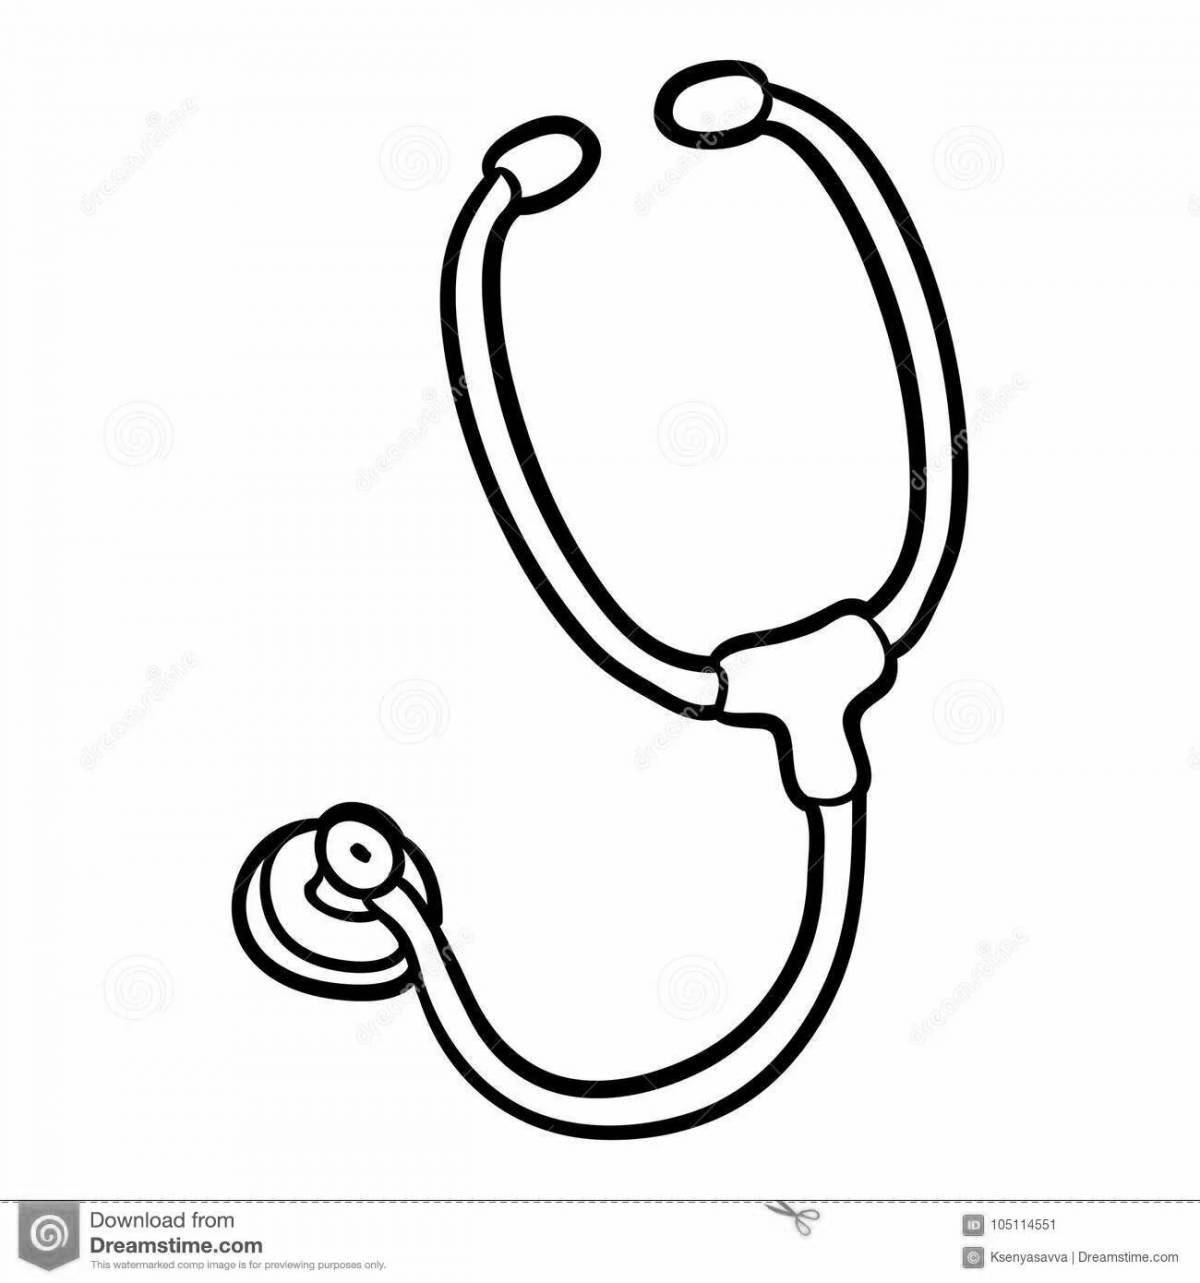 Doctor's funny tools coloring page